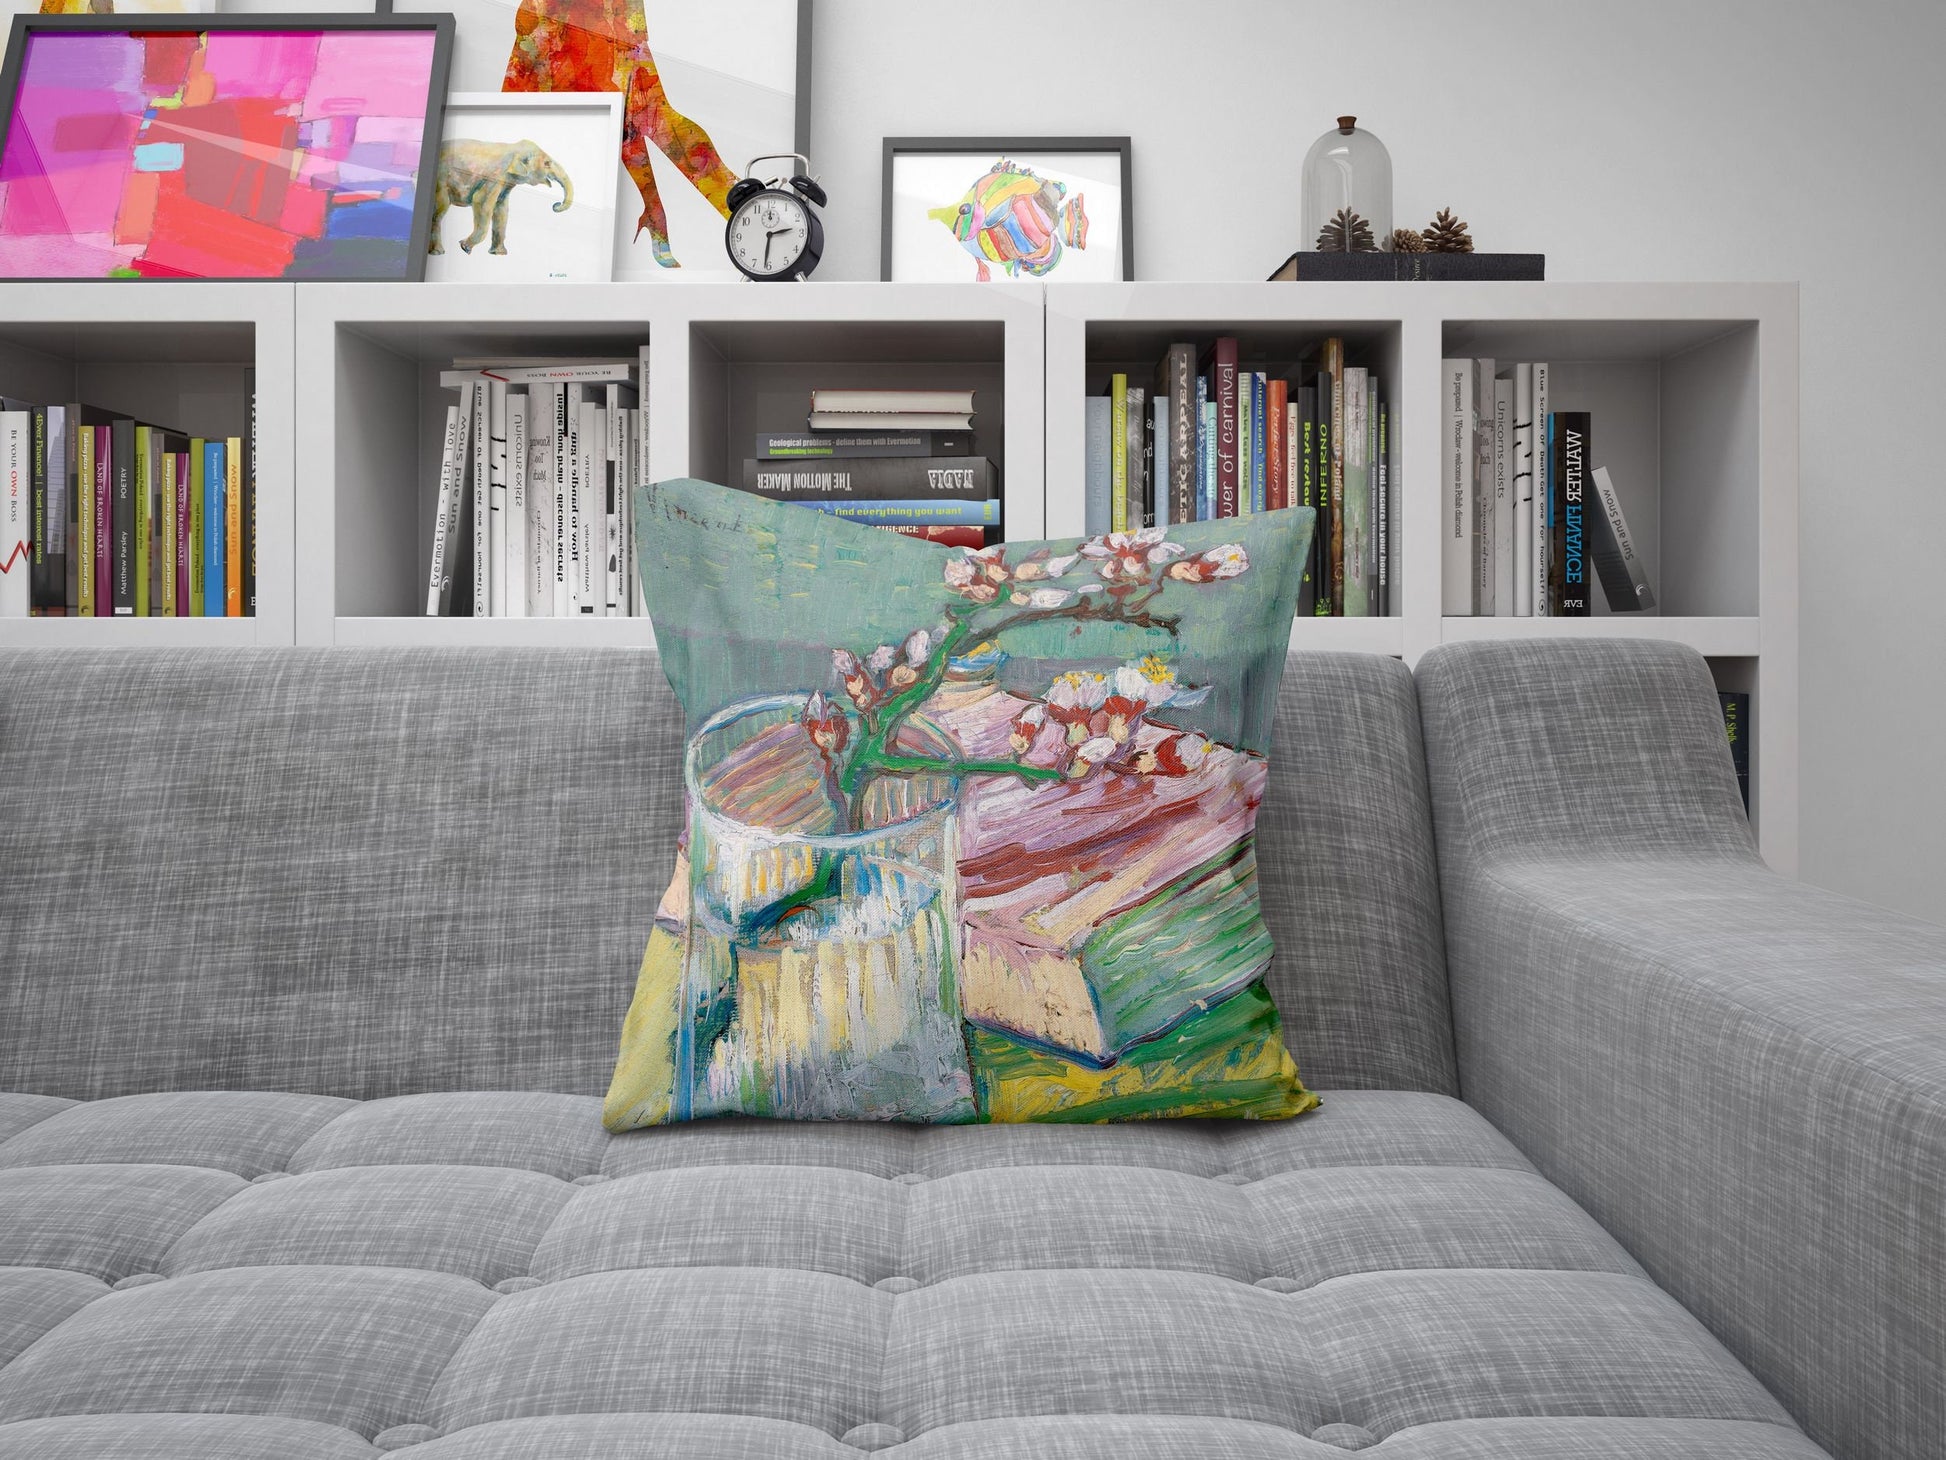 Vincent Van Gogh Famous Art Blossoming Almond Branch In A Glass With A Book, Throw Pillow, Designer Pillow,22X22 Pillow Cover